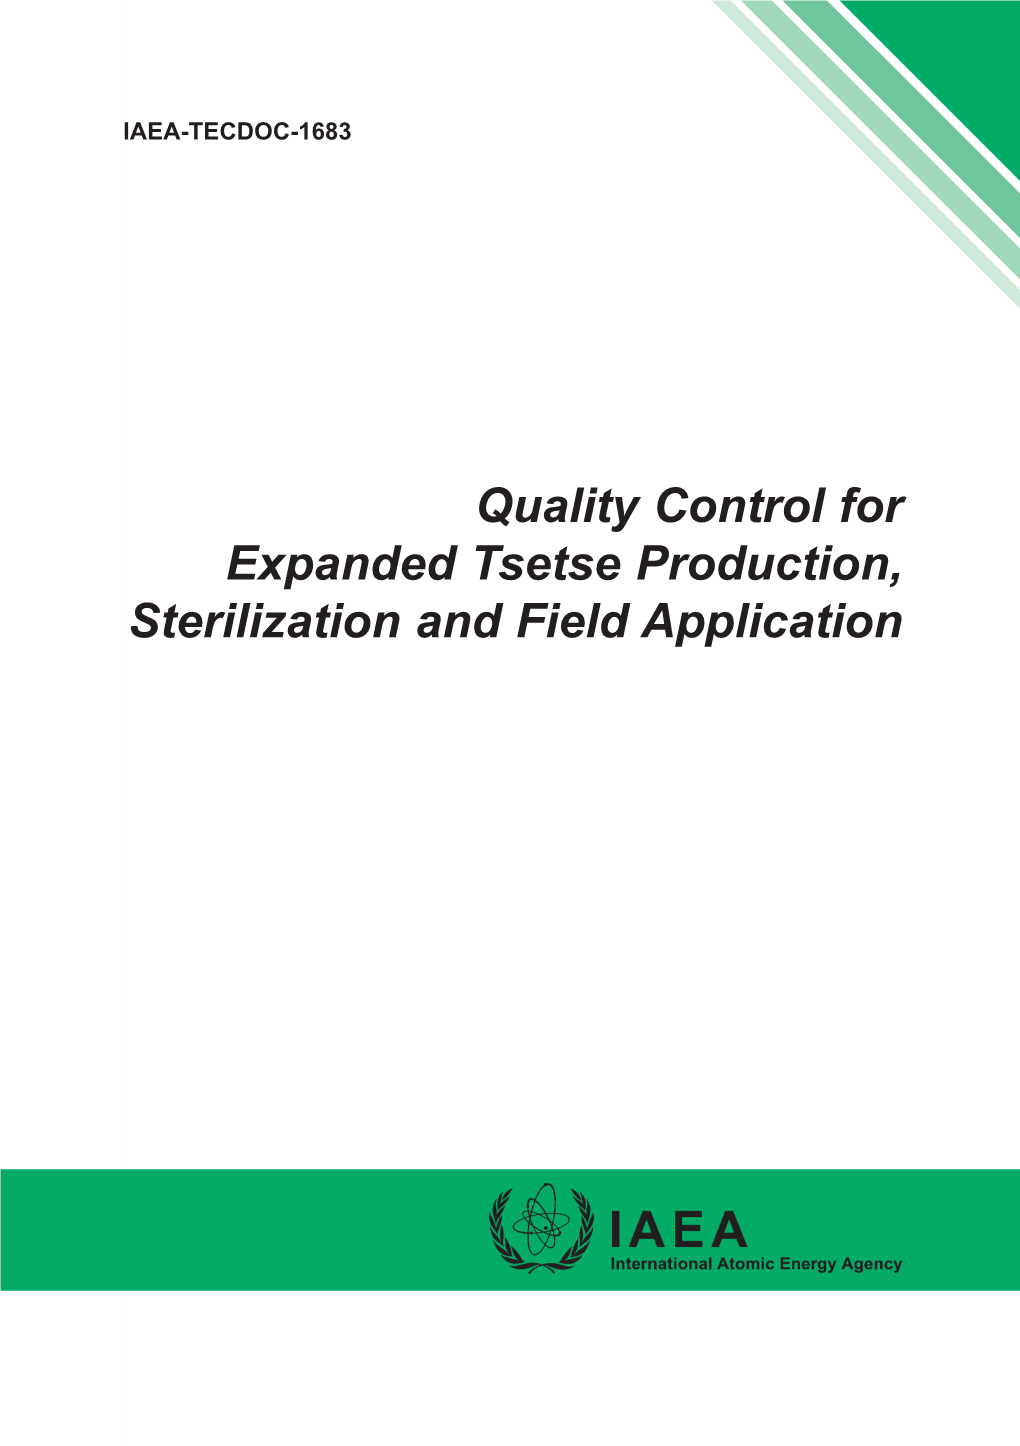 Quality Control for Expanded Tsetse Production, Sterilization and Field Application